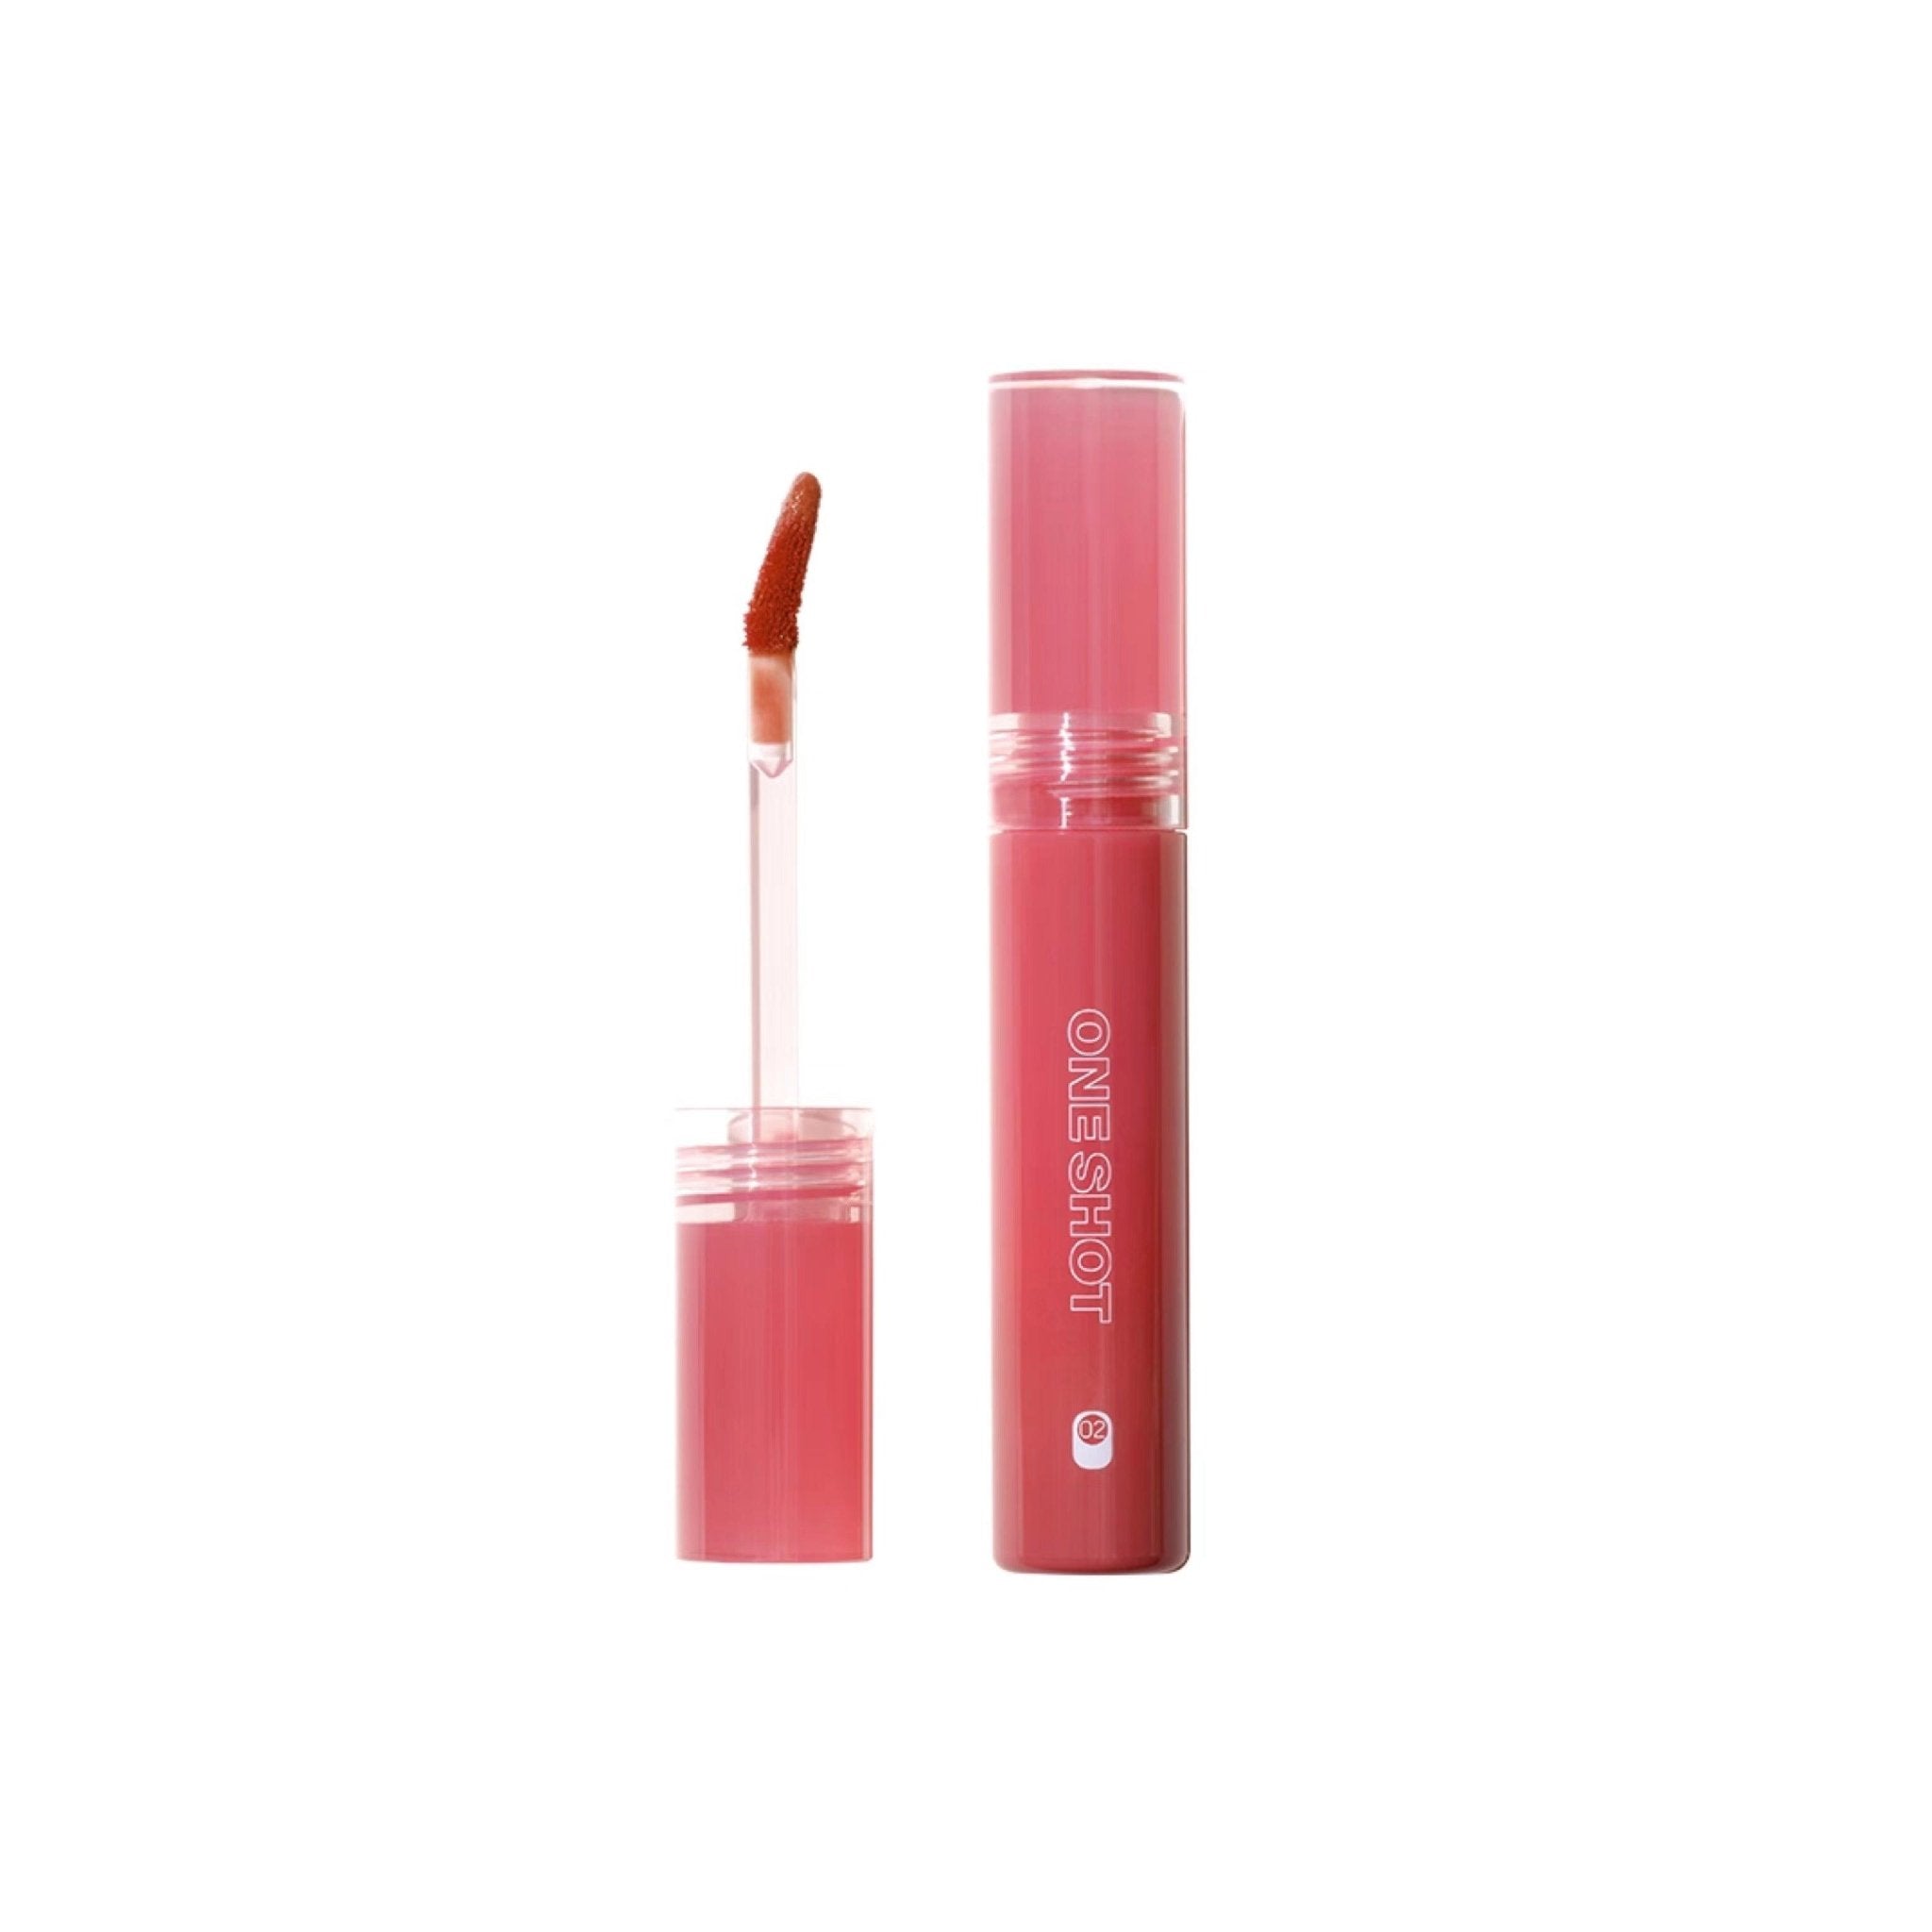 INTO YOU One Shot Lip Tint IY036 - Chic Decent